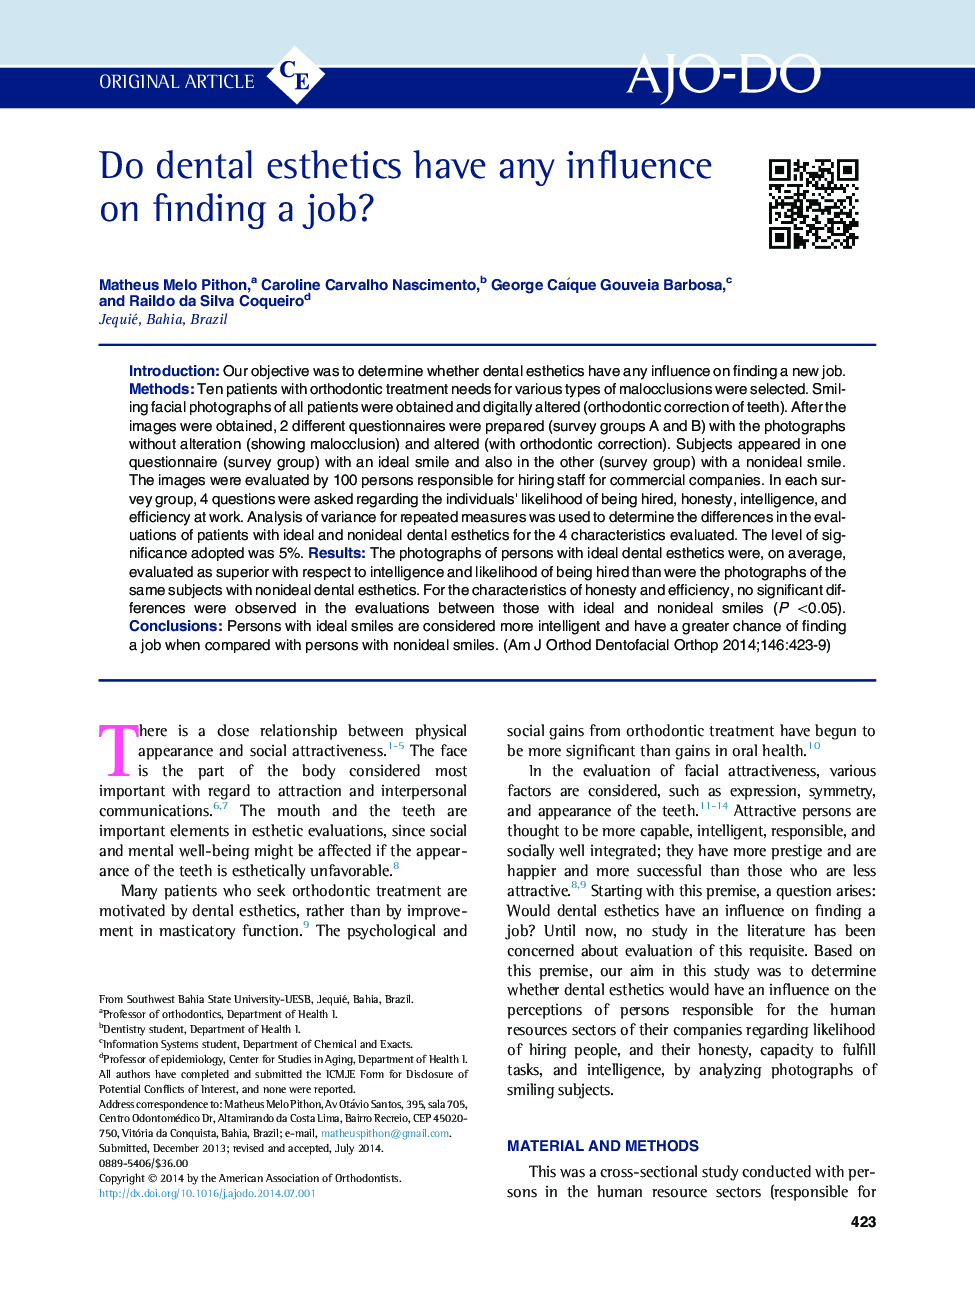 Do dental esthetics have any influence on finding a job? 